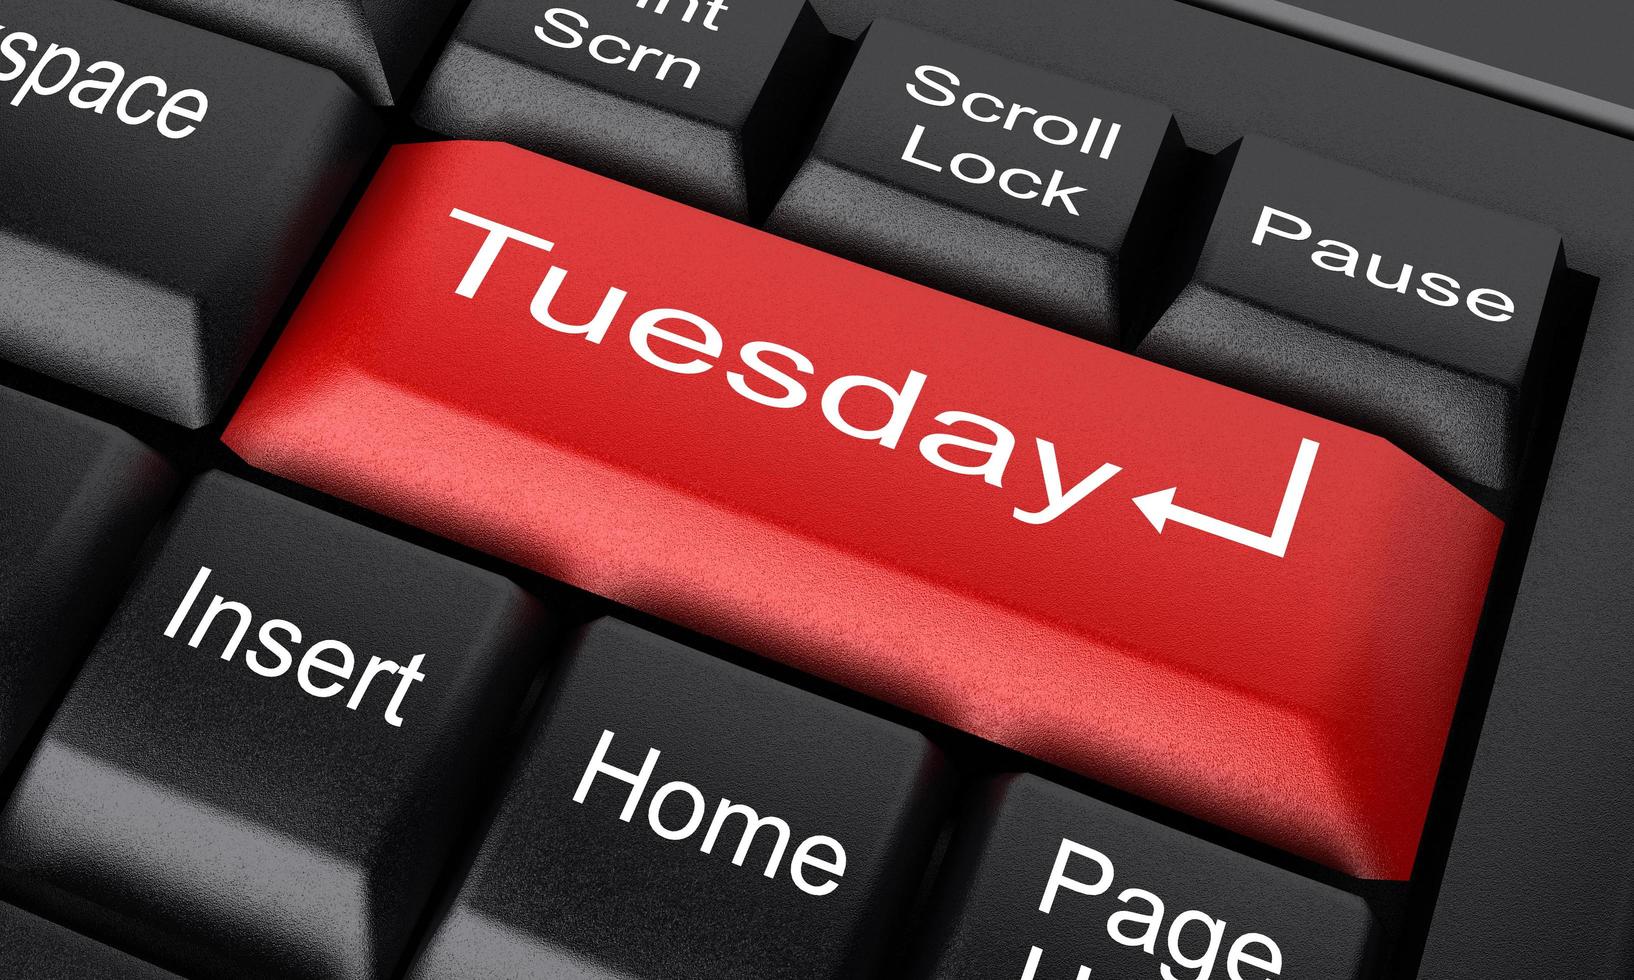 Tuesday word on red keyboard button photo